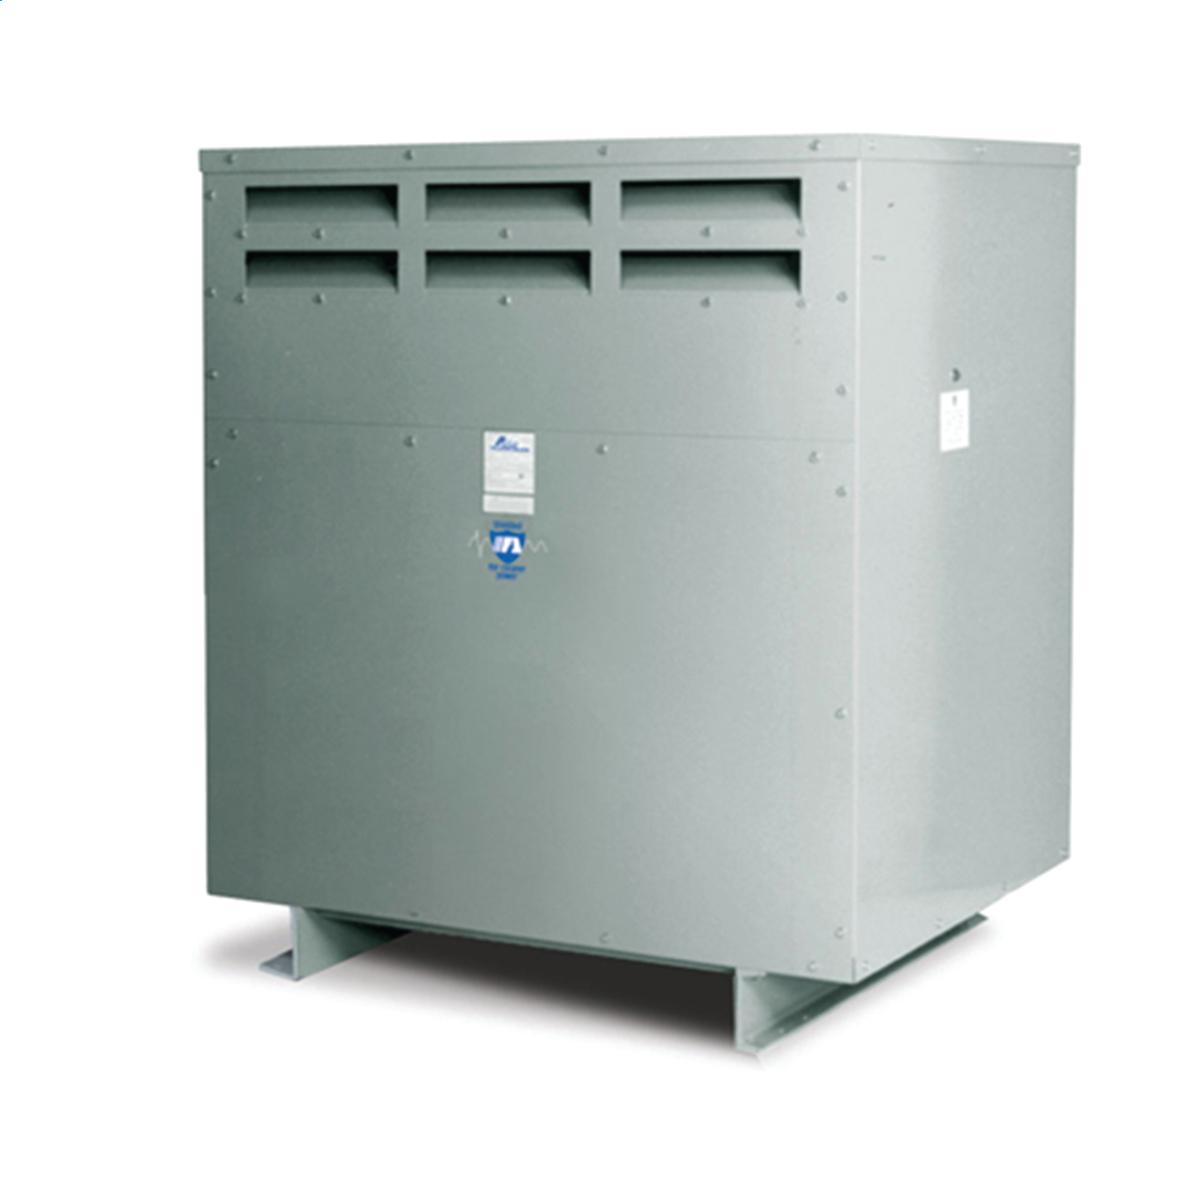 Hubbell WI002M17 Medium Voltage Transformer - Three Phase, 4160Δ - 240ΔV, 2000kVA  ; Lower operating cost over Liquid-filled ; No additional fireproofing or venting ; Long life expectancy ; Smaller, lighter easy to maintain